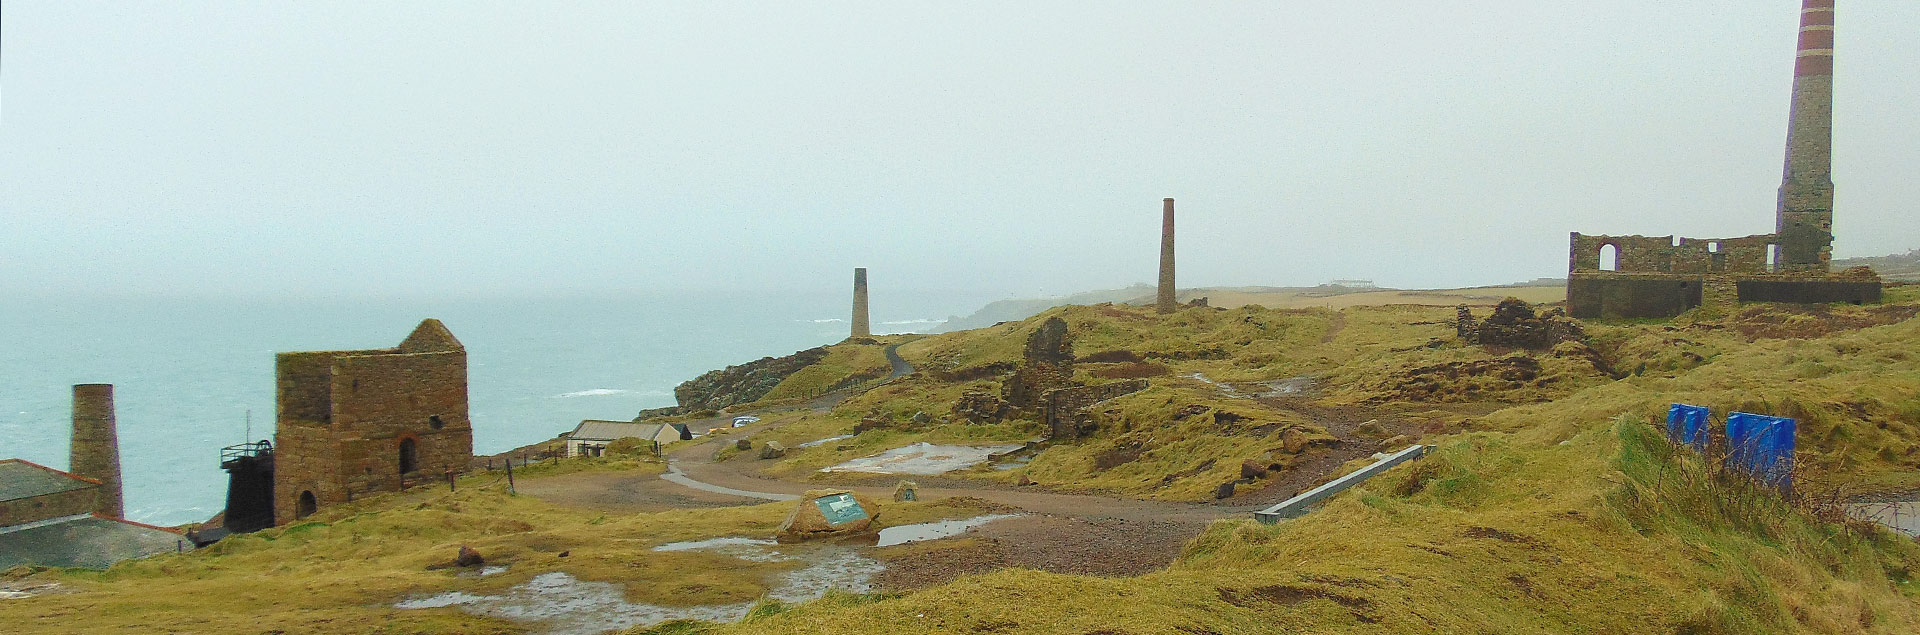 Film locations in Cornwall and Devon